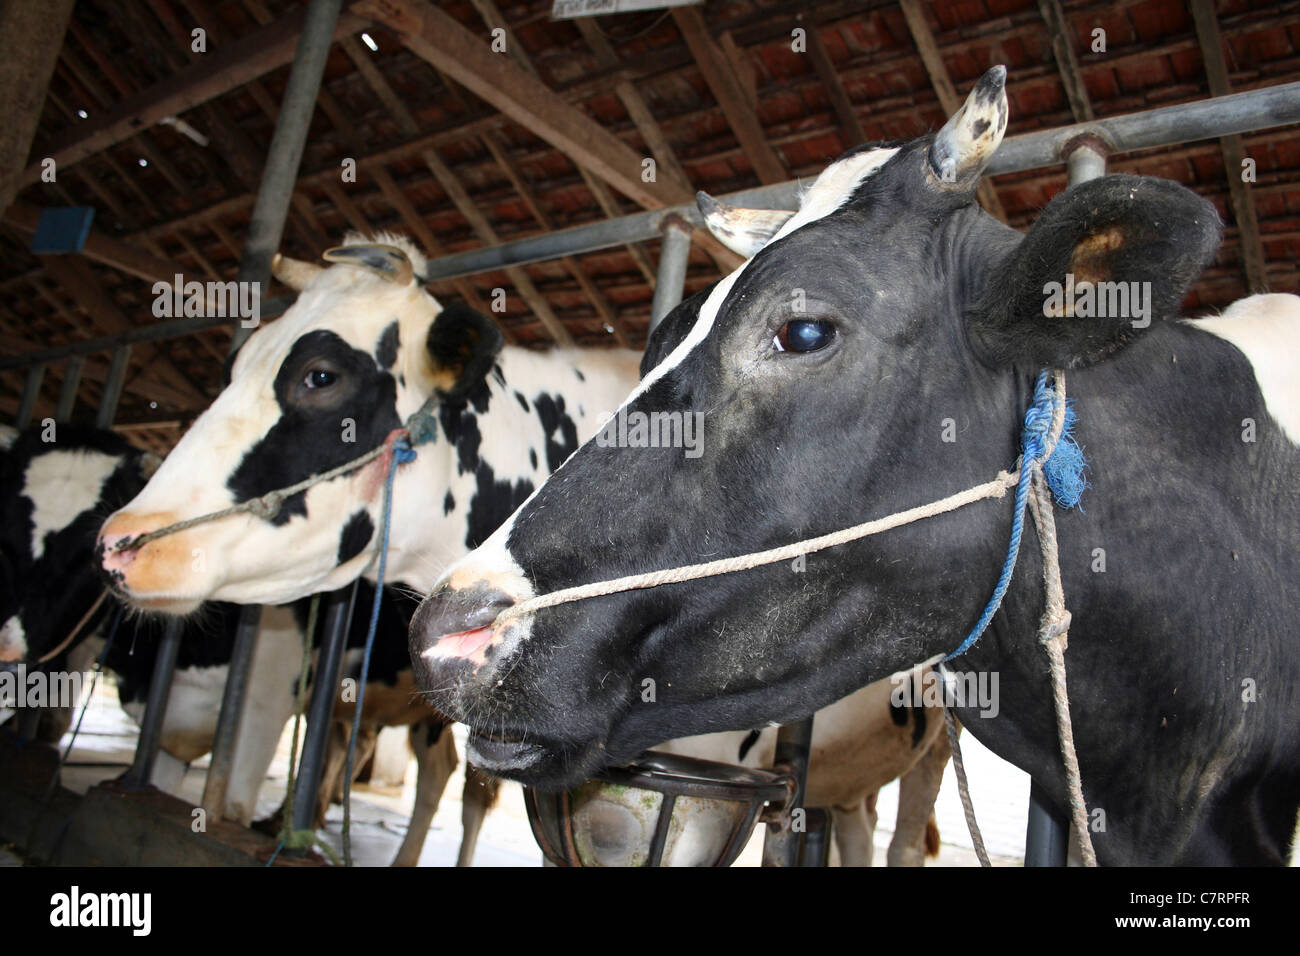 Cows In A Shed Stock Photo